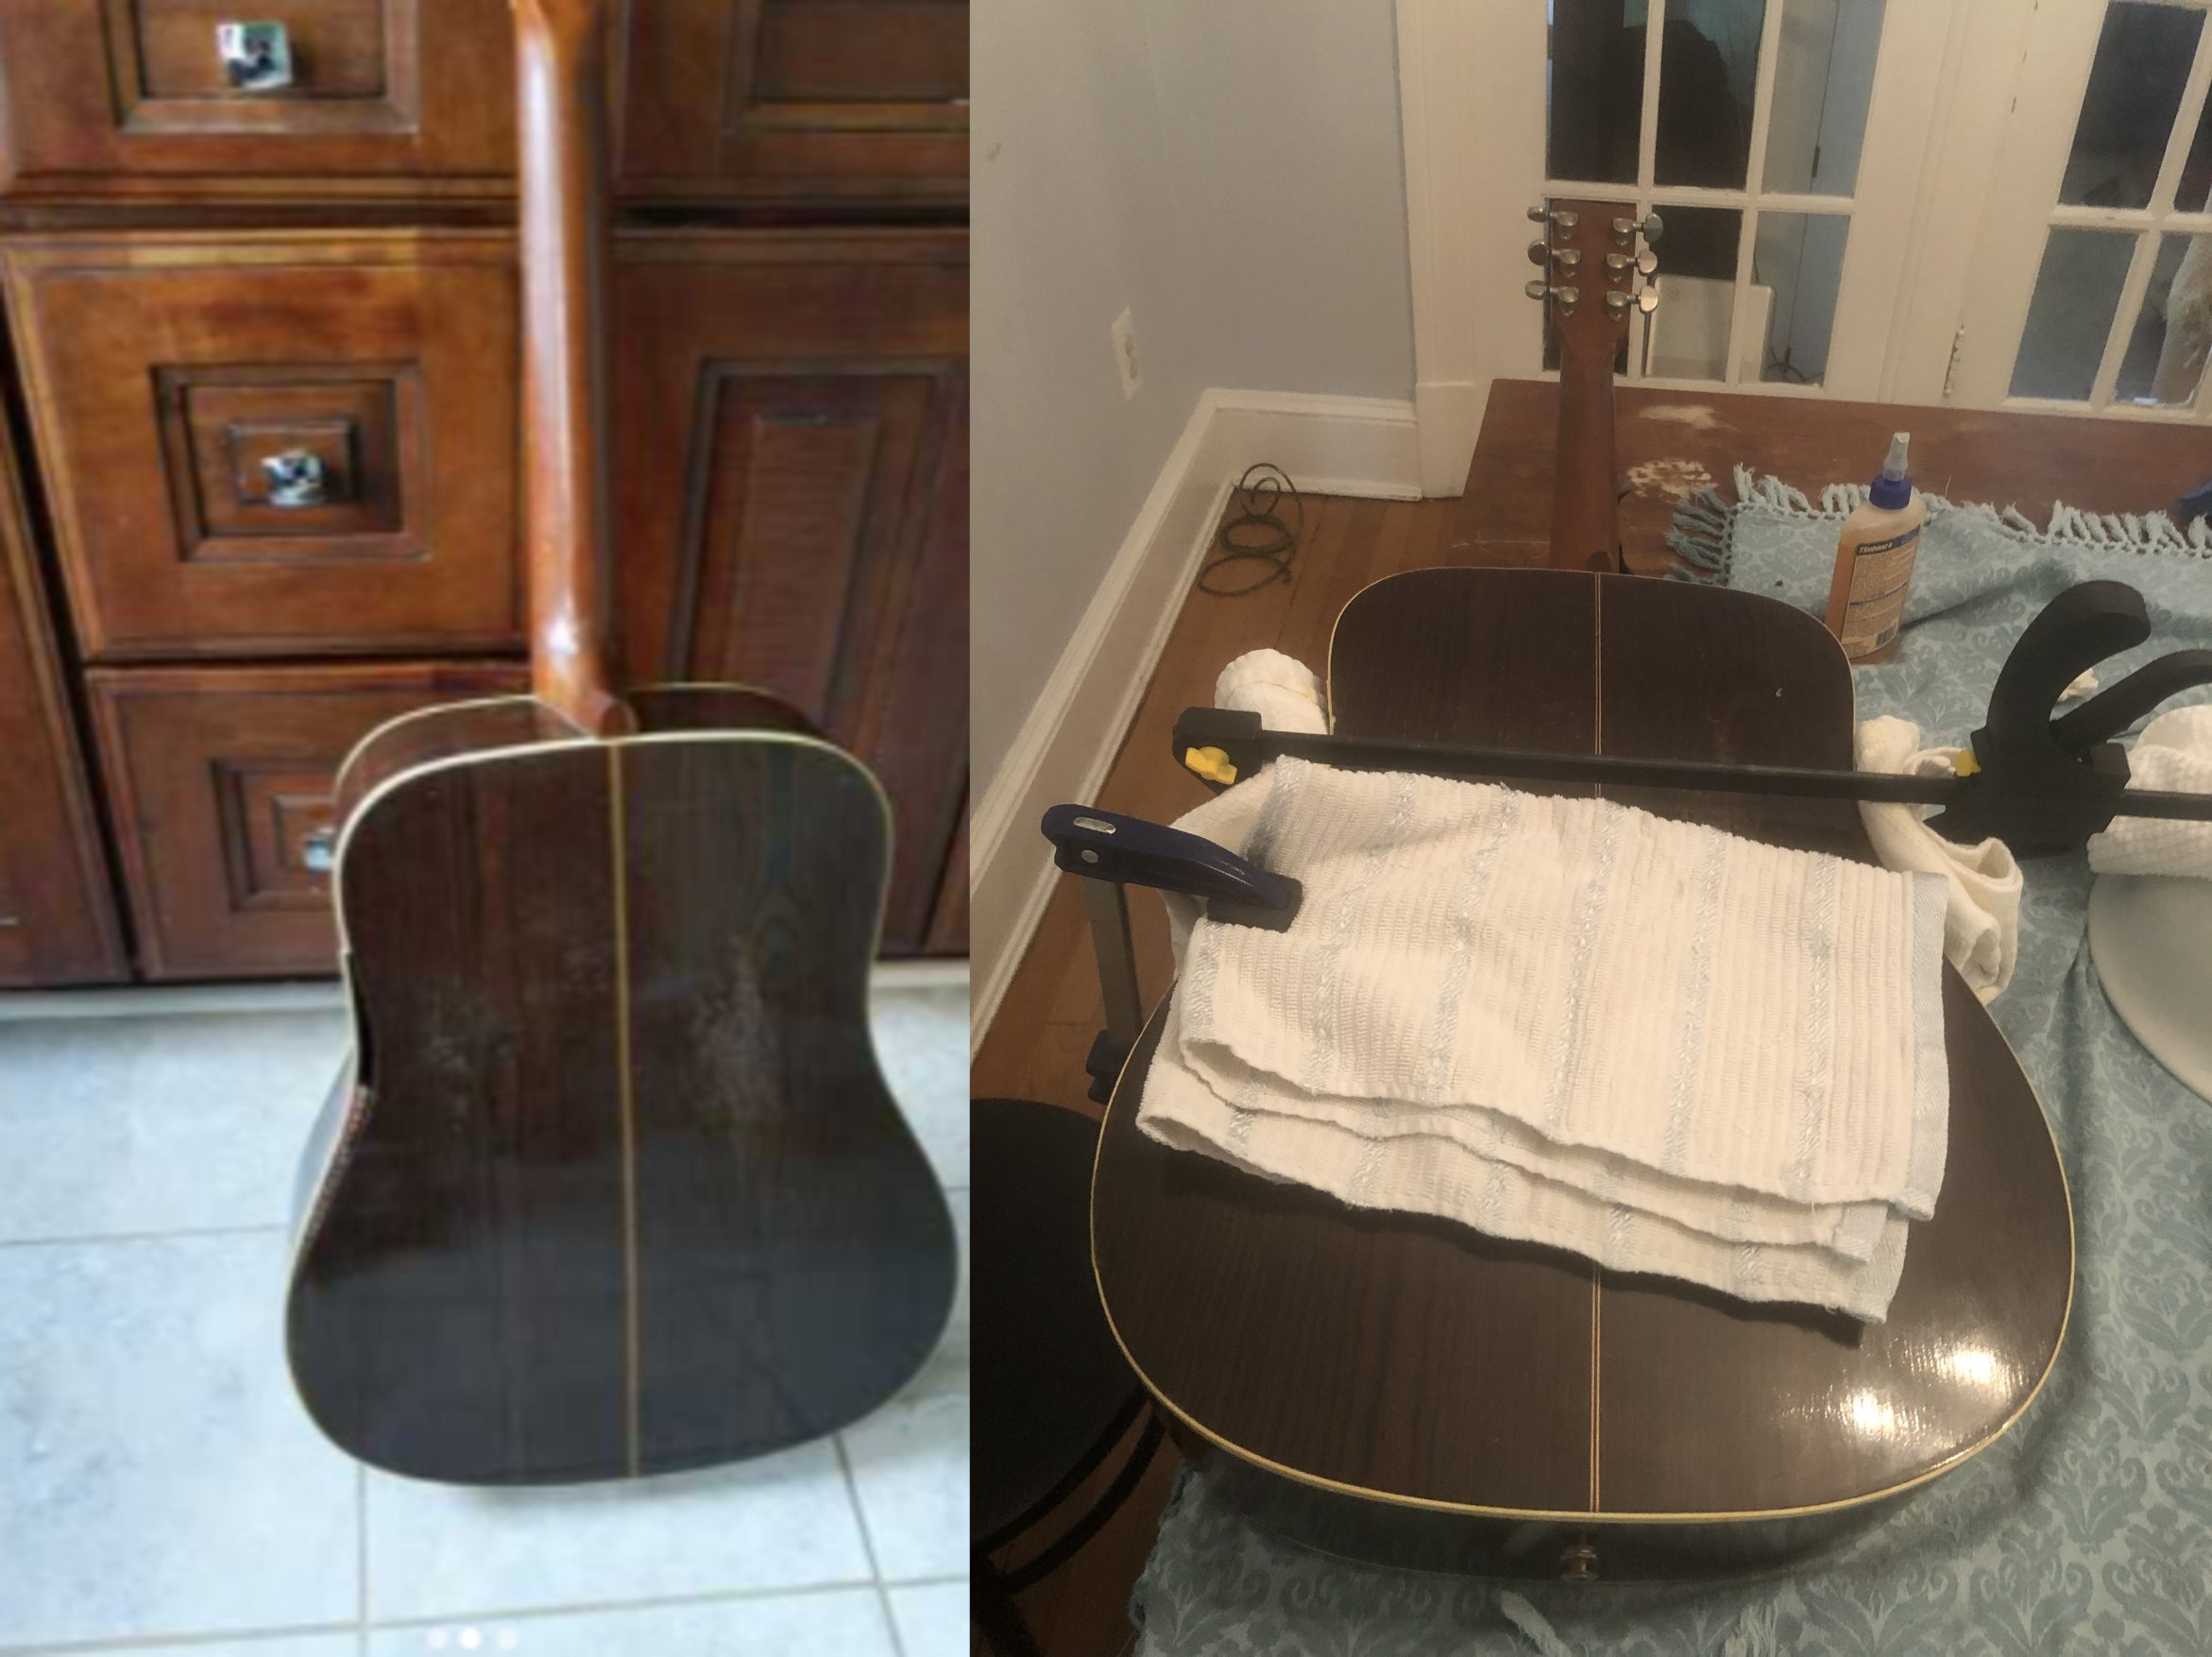 The guitar as it appeared on Craigslist and the guitar as it's being repaired, split screen